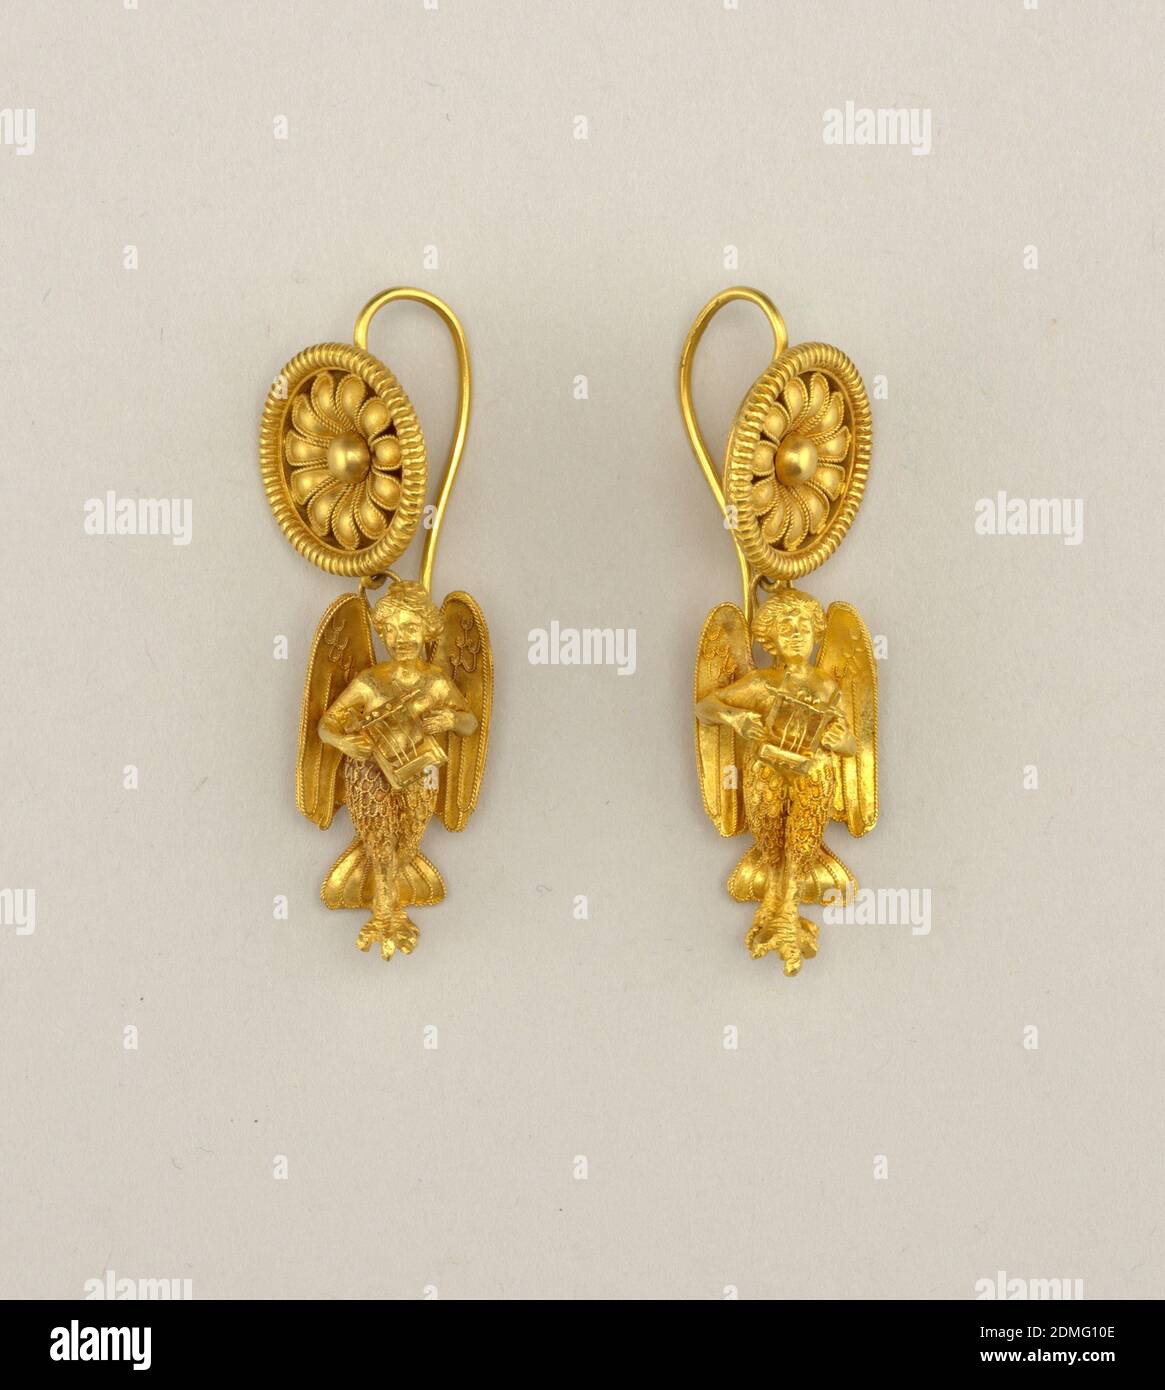 Siren Earrings, Gold, Each earring with circular ornament in open-daisy design from which hangs a fantastic figure (head and upper body, human with wings and feet of a bird)., Rome, Italy, ca. 1870, jewelry, Decorative Arts, Pair of earrings, Pair of earrings Stock Photo